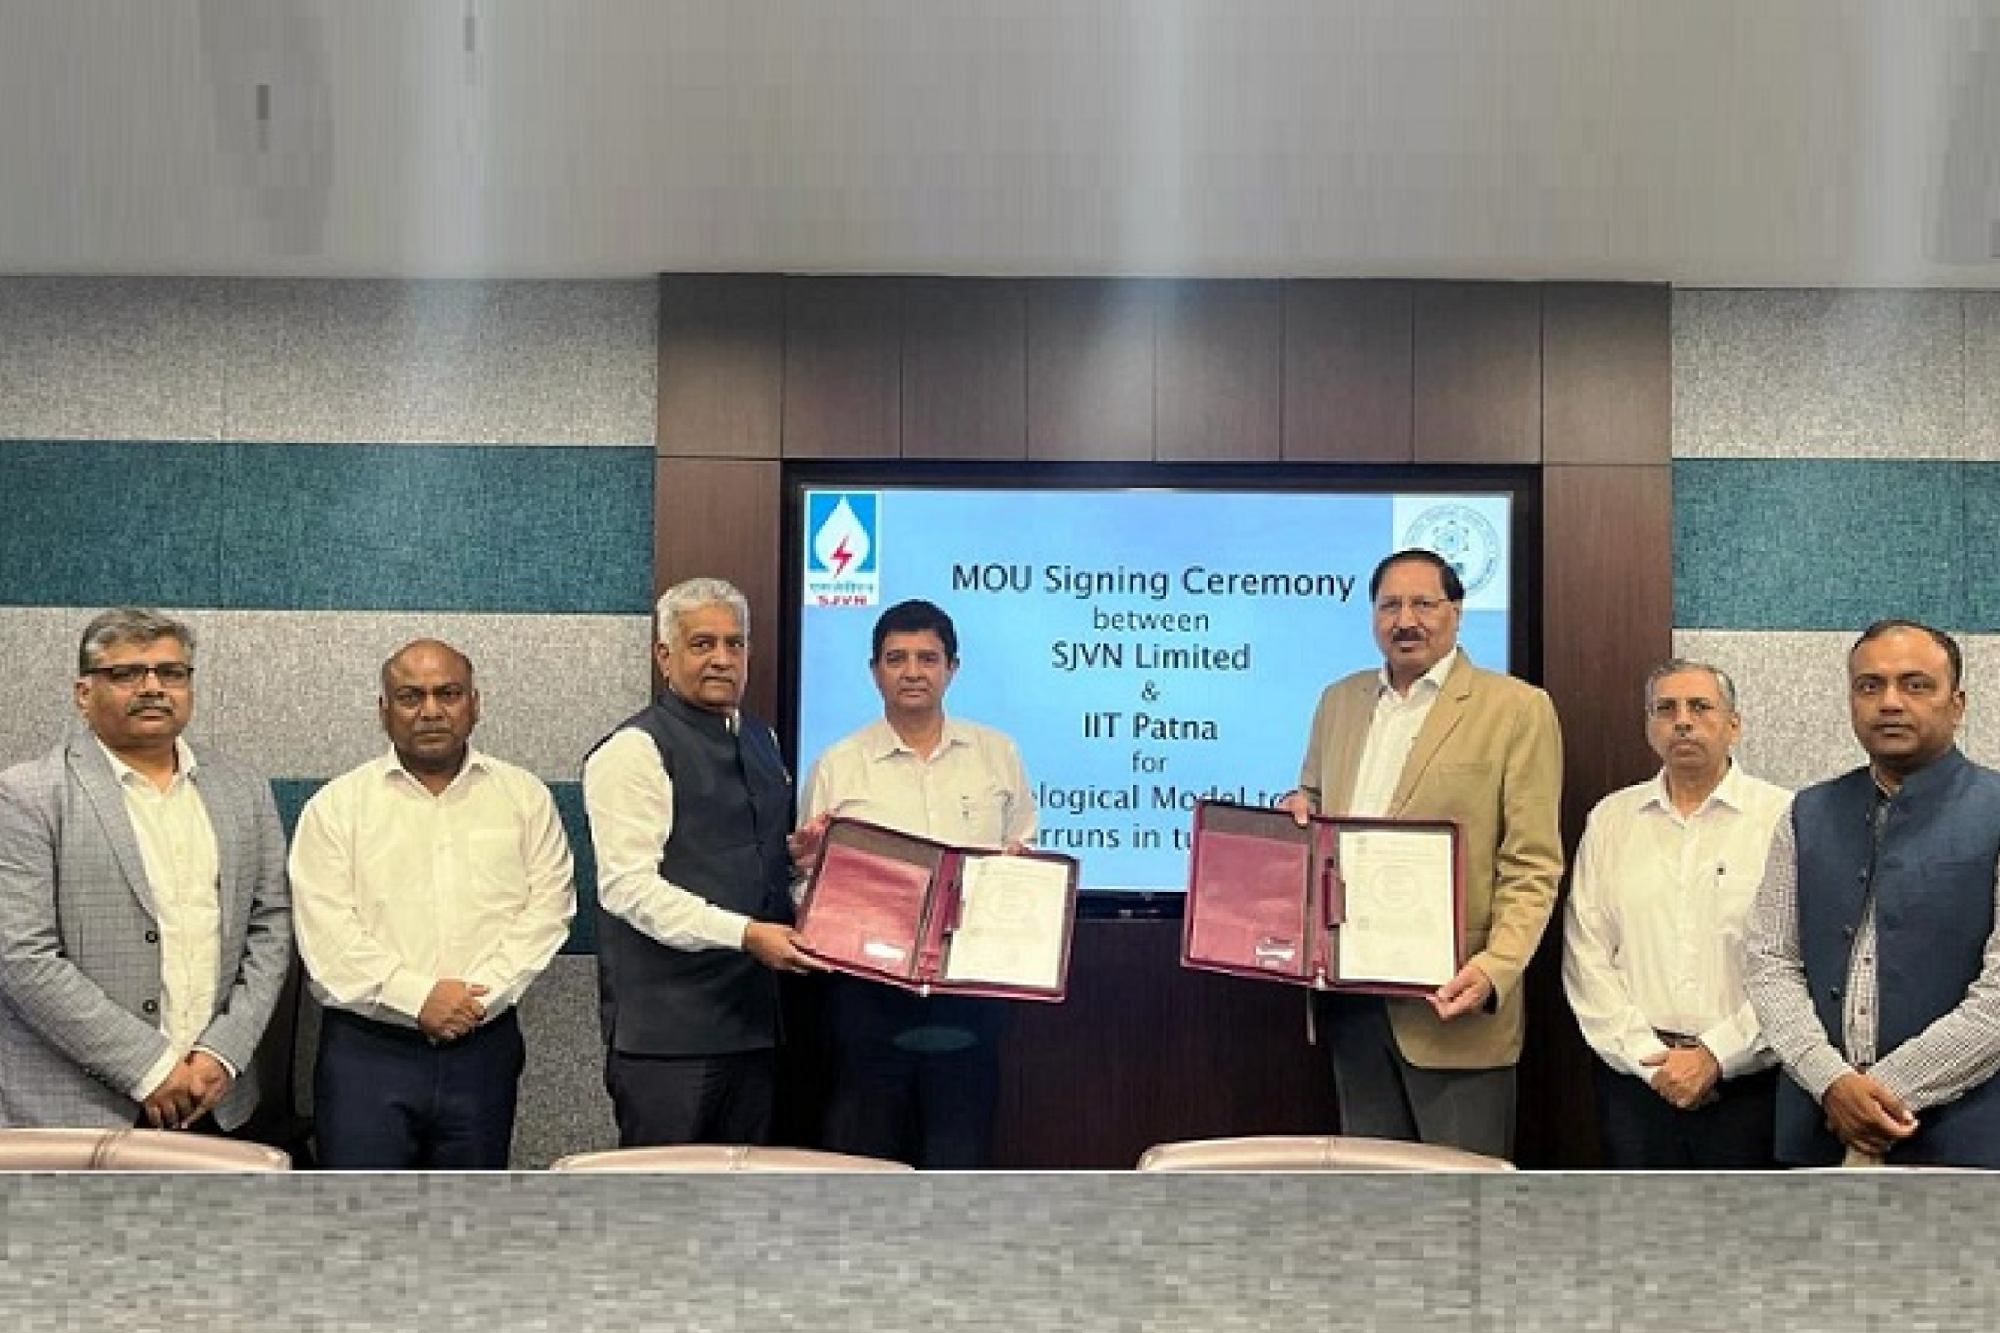 SJVN partners with IIT Patna to improve Tunnelling Project Performance